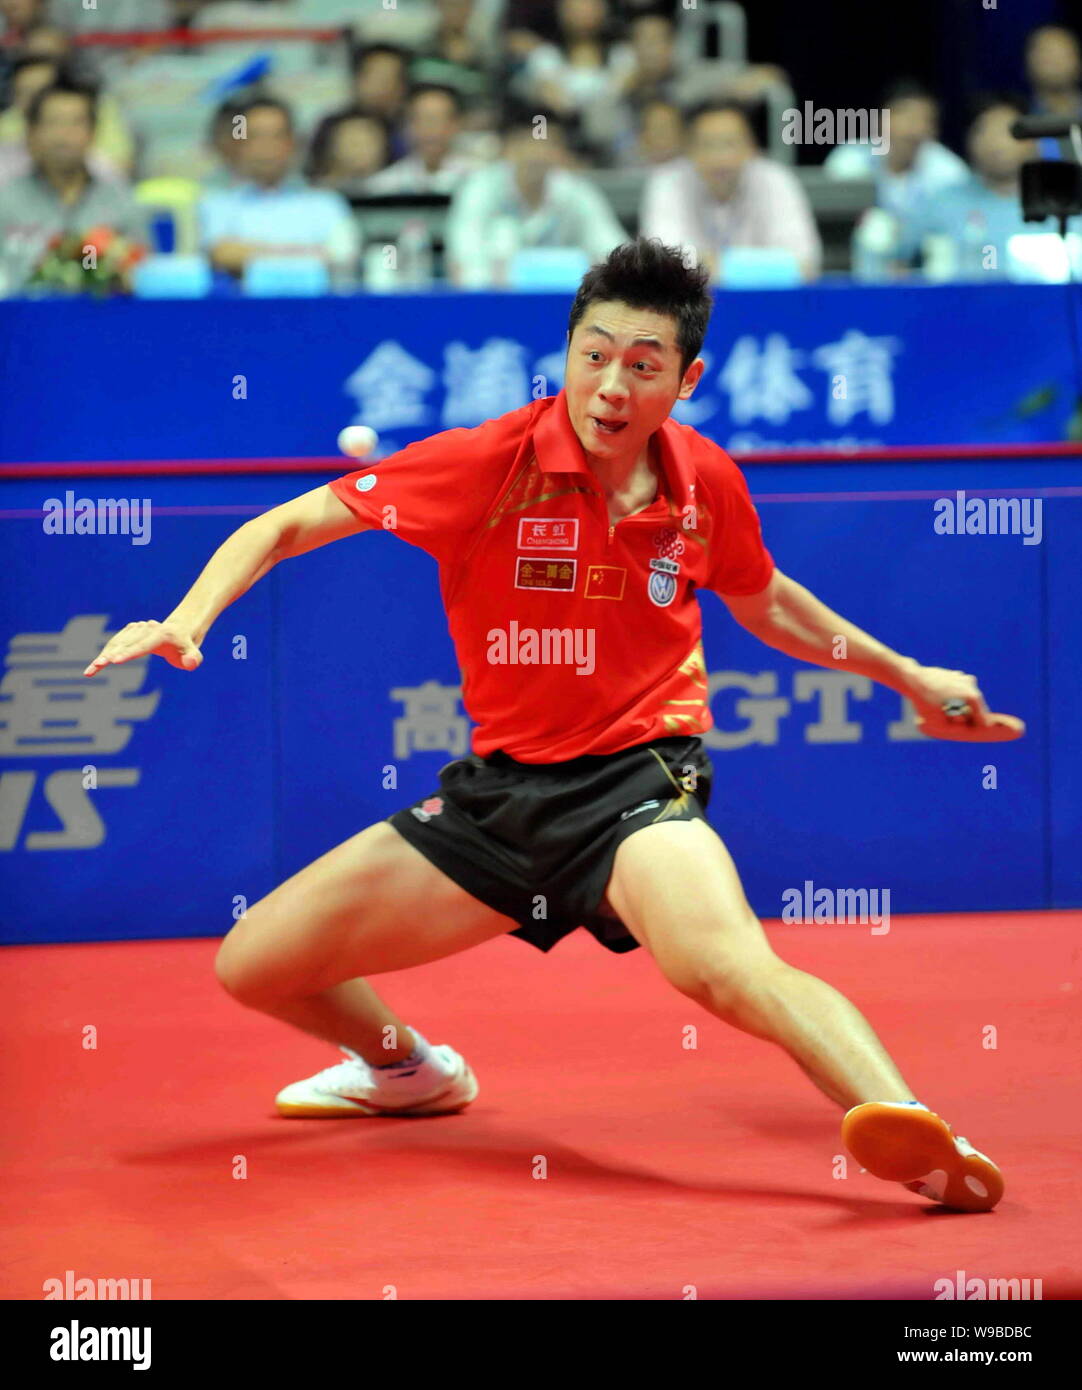 Chinas Xu Xin competes during the mens event of the 2010 Volkswagen China  vs World Team Table Tennis Challenge in Shanghai, China, 30 June 2010. The  Stock Photo - Alamy